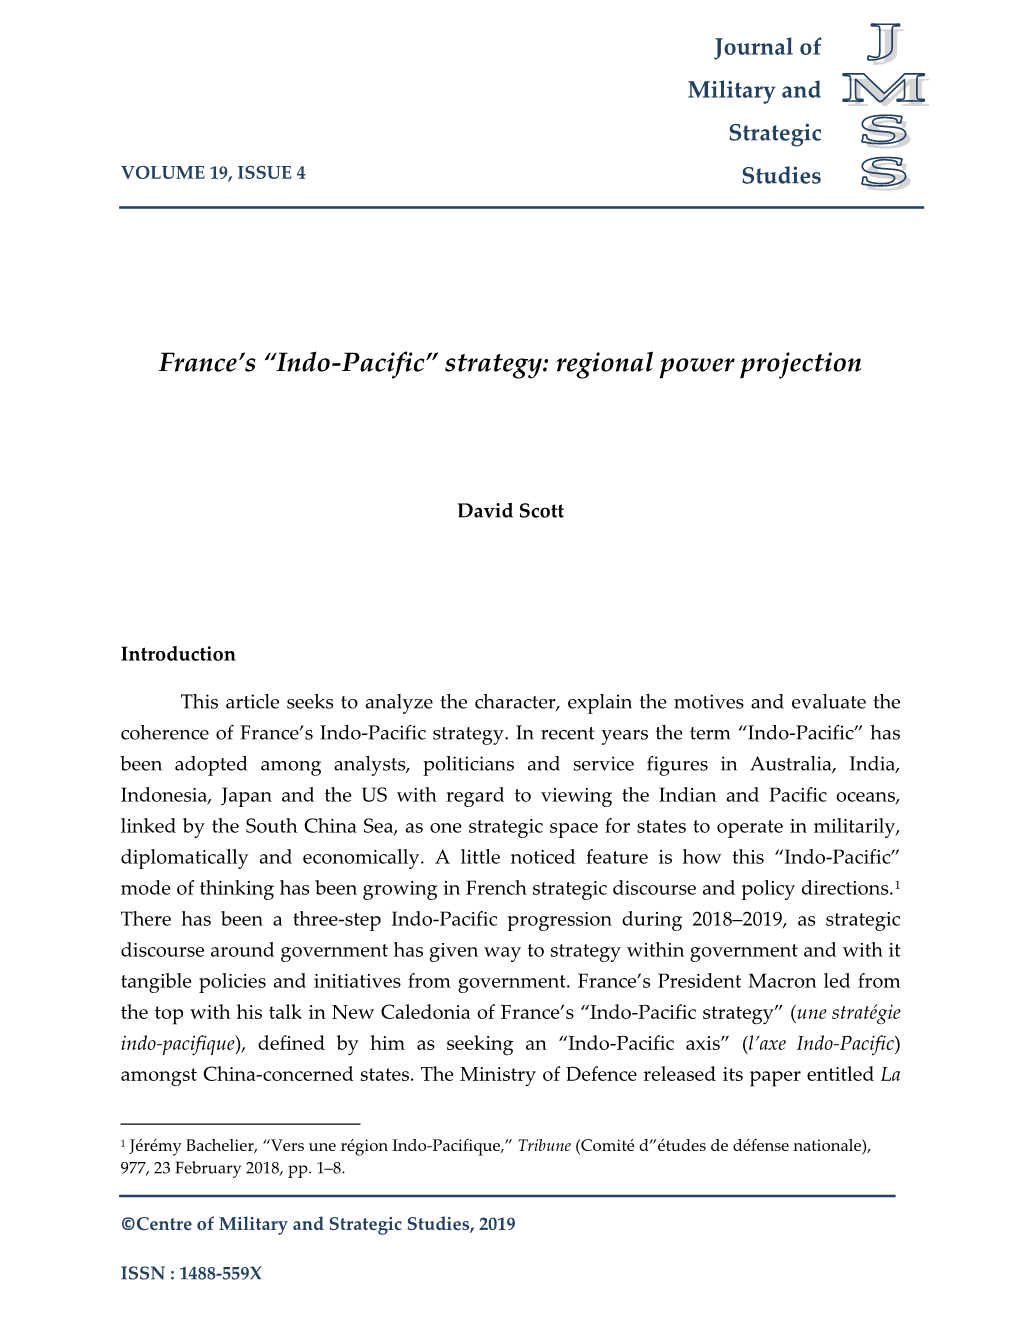 France's “Indo-Pacific” Strategy: Regional Power Projection